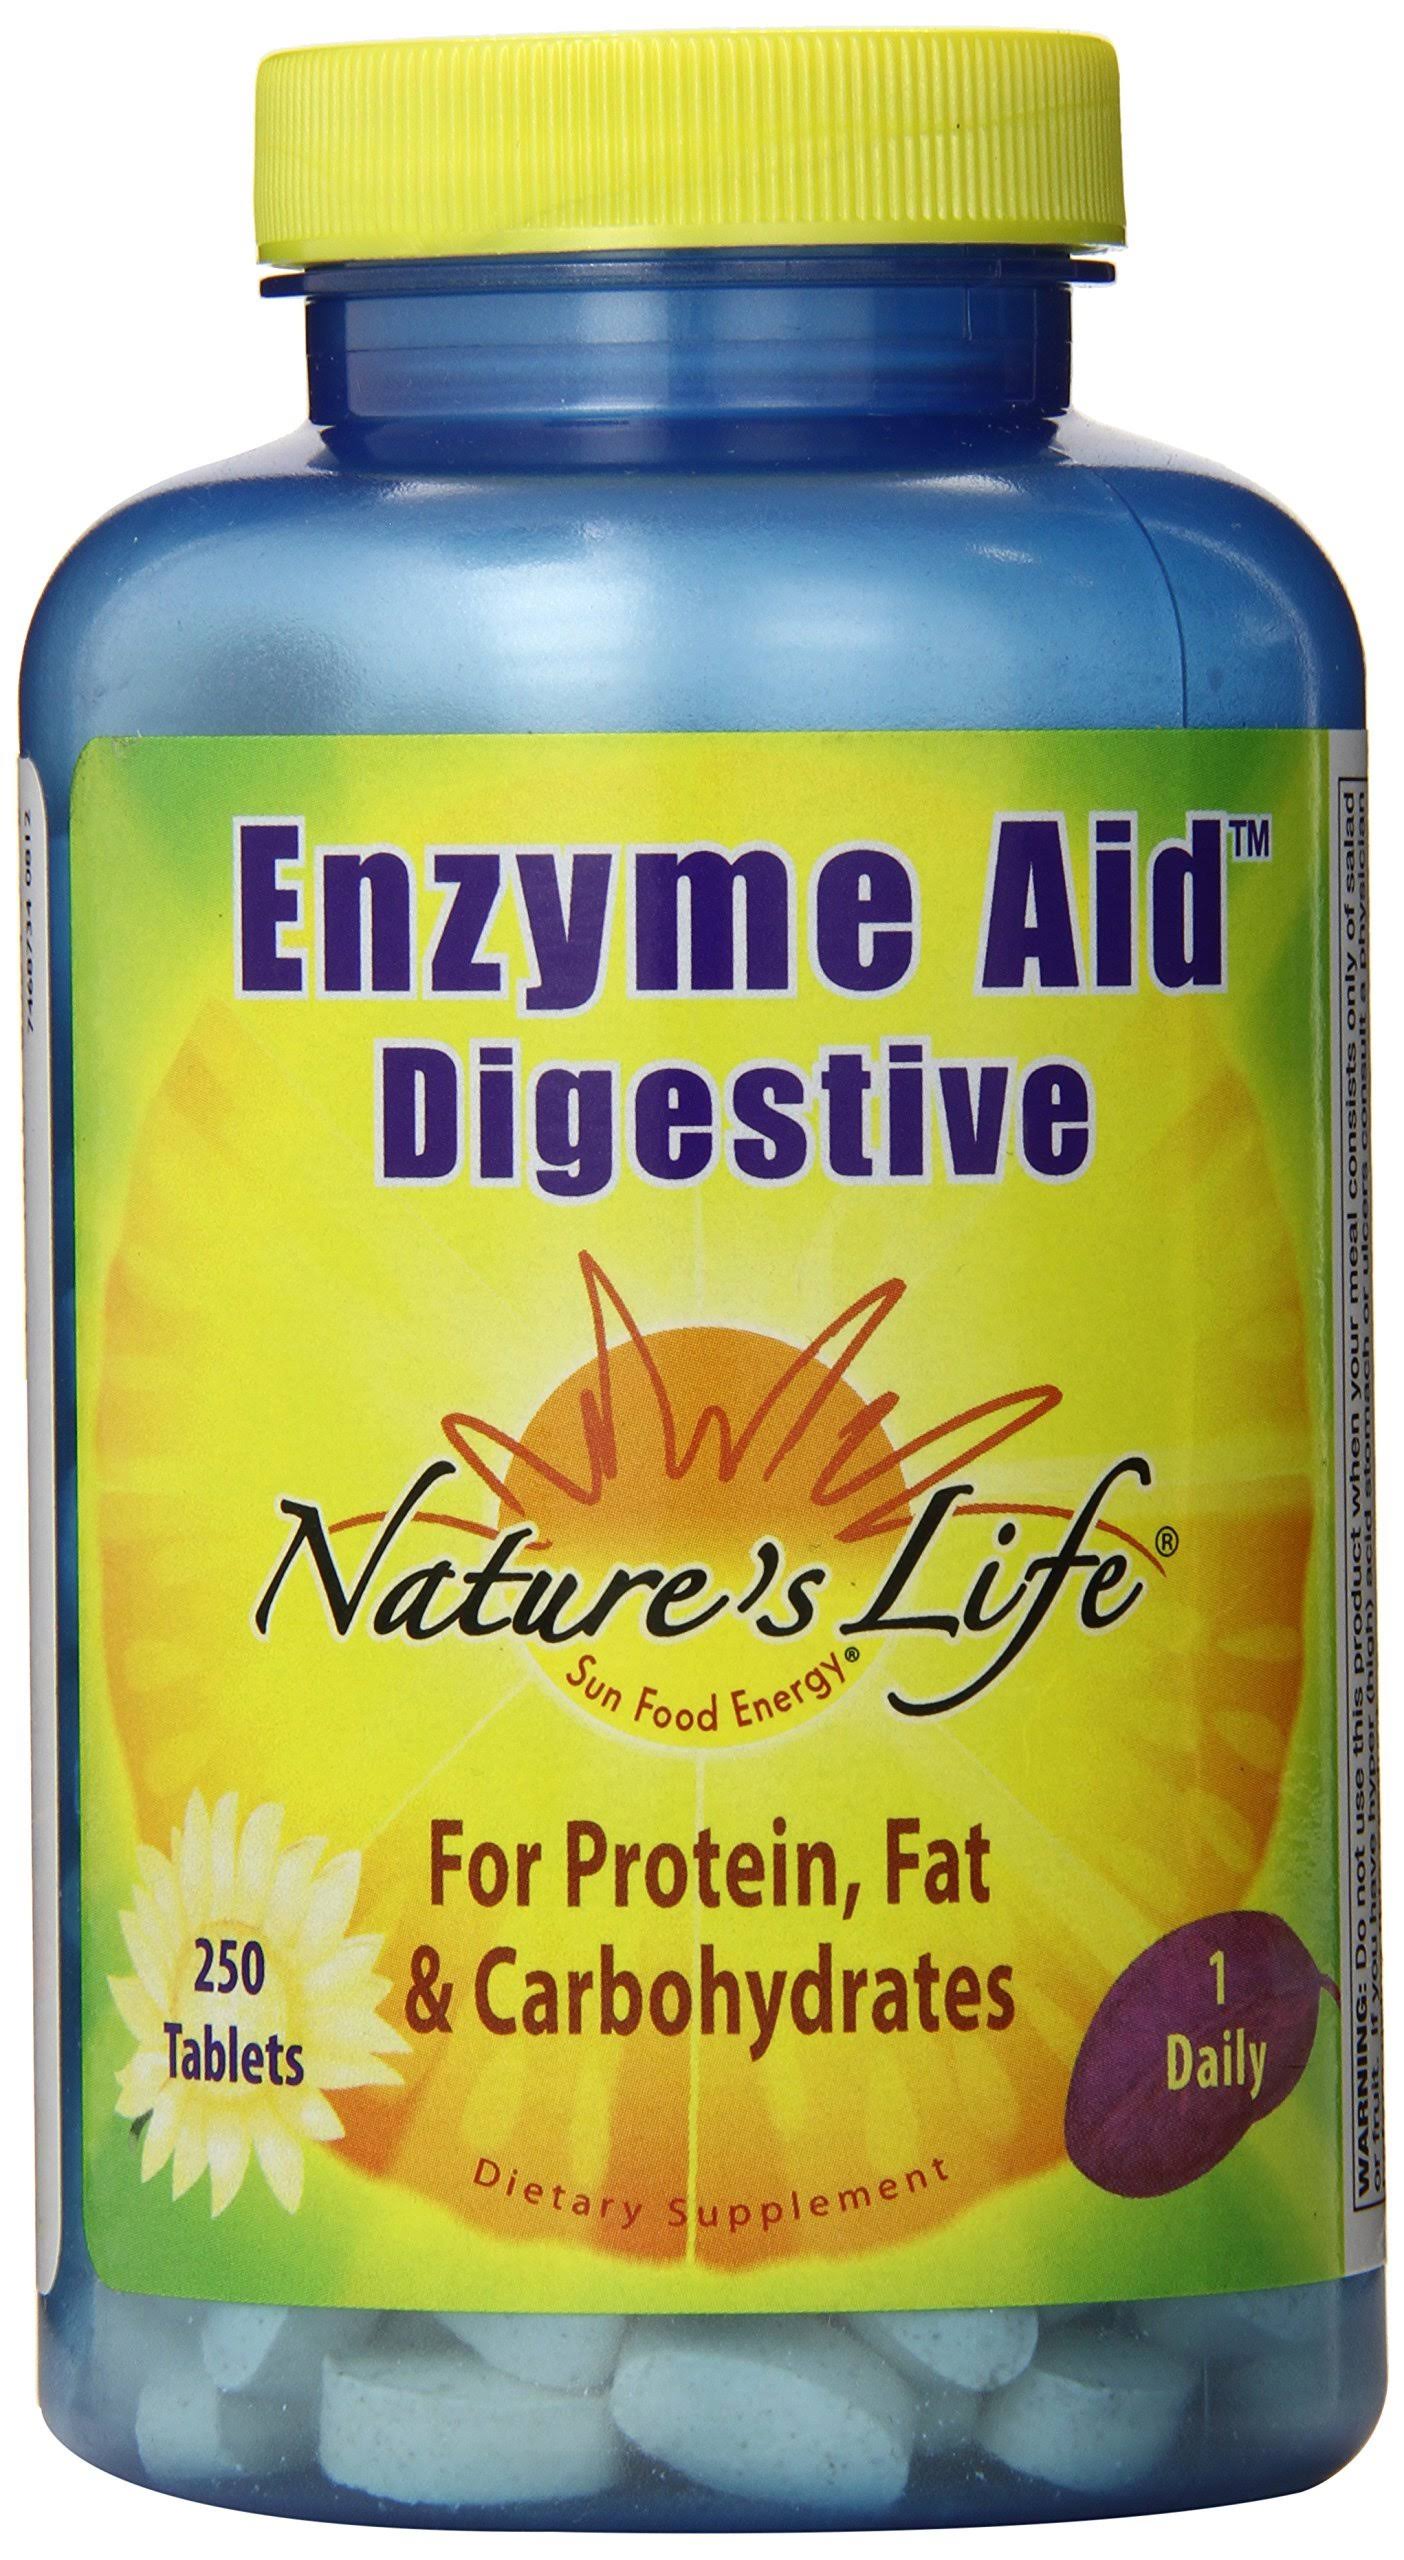 Nature's Life Enzyme Aid Digestive Food Supplement - 250 Tablets